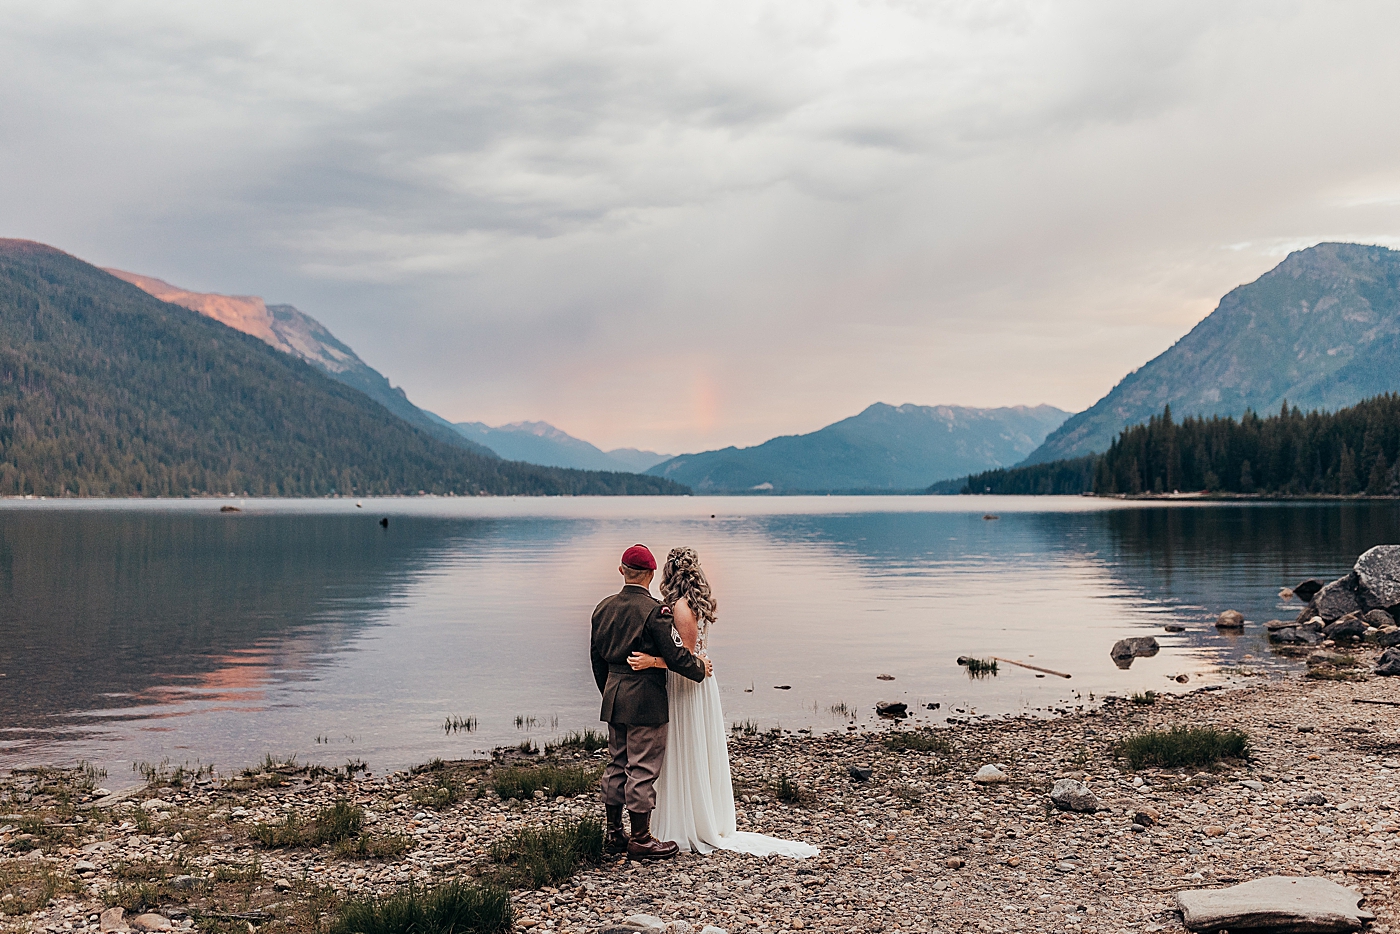 Couple looking out over Lake Wenatchee at sunrise. Photo by Megan Montalvo Photography.